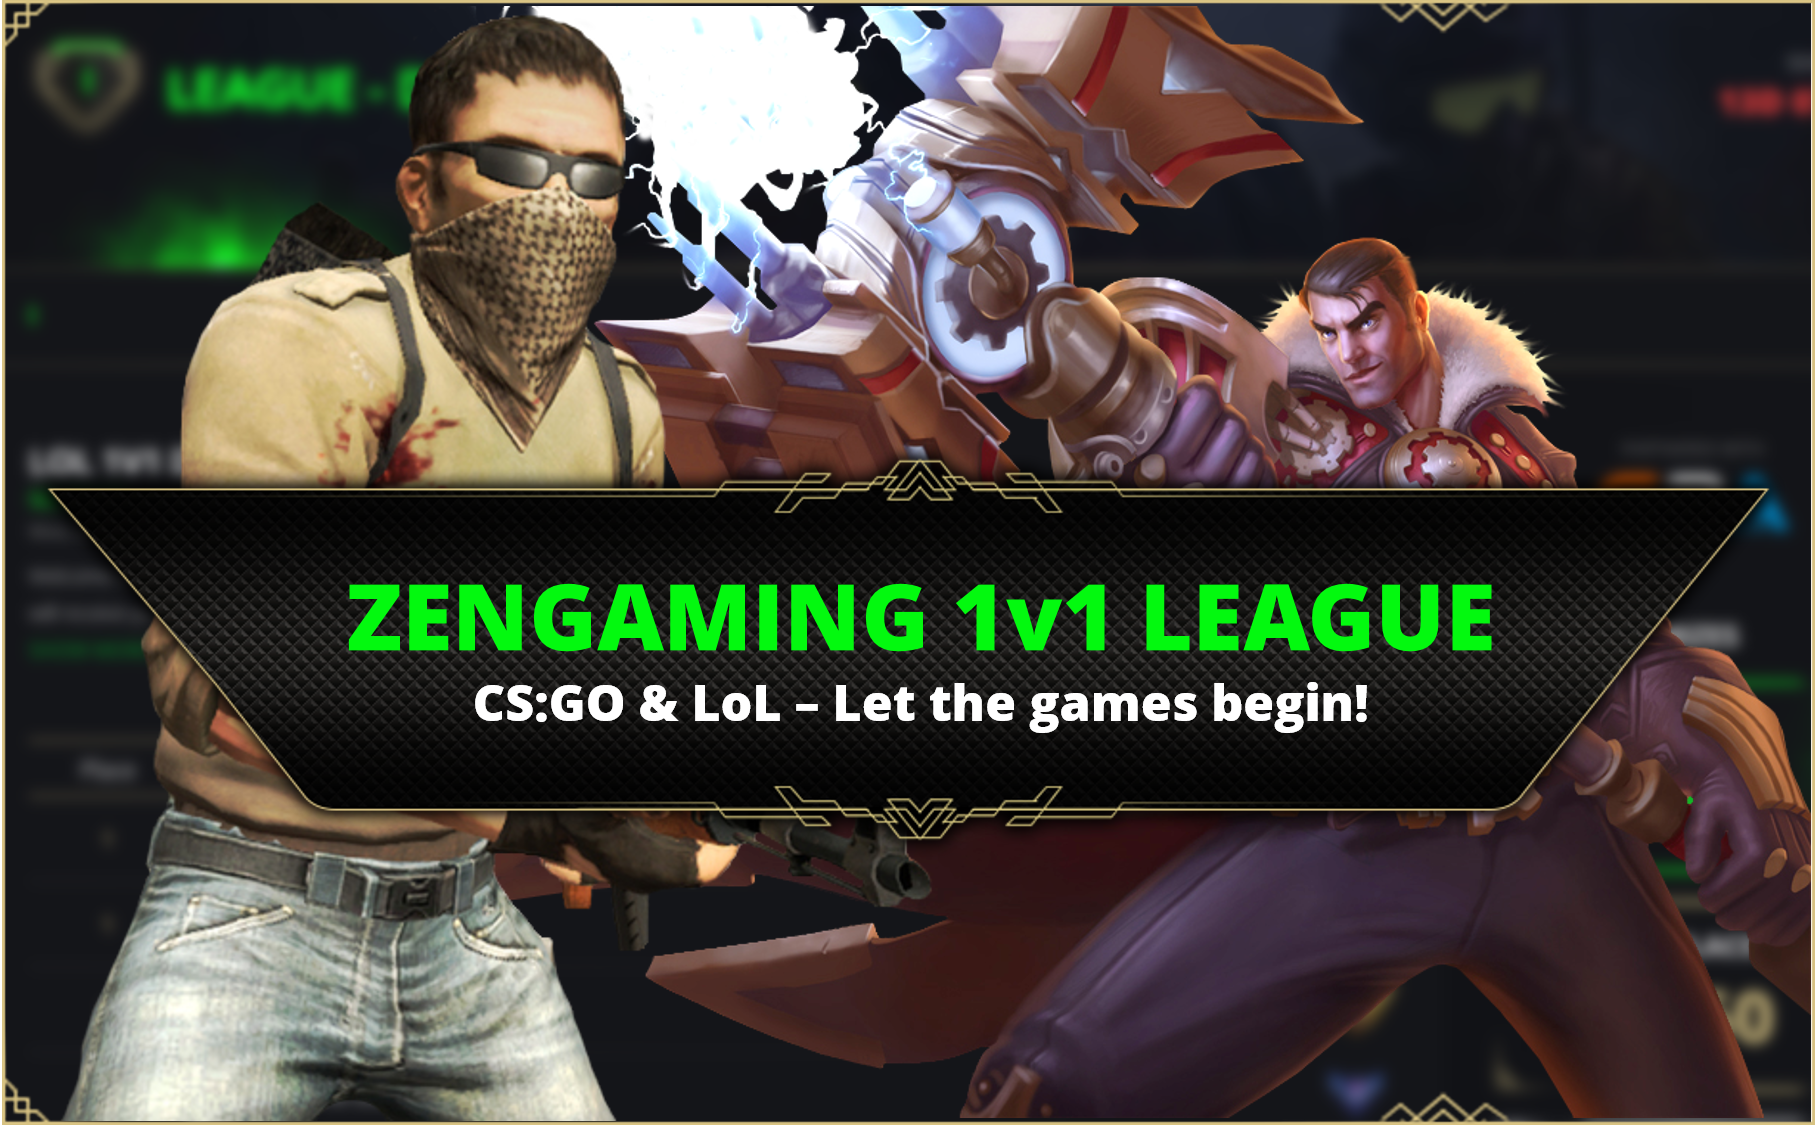 Zengaming - 🏆 Crush the leaderboard, WIN instant prizes 💥 Top the CS:GO  2v2 or LoL 1v1 Leaderboards and win: 1st place - $10 G2A Giftcard 2nd place  - $5 G2A Giftcard